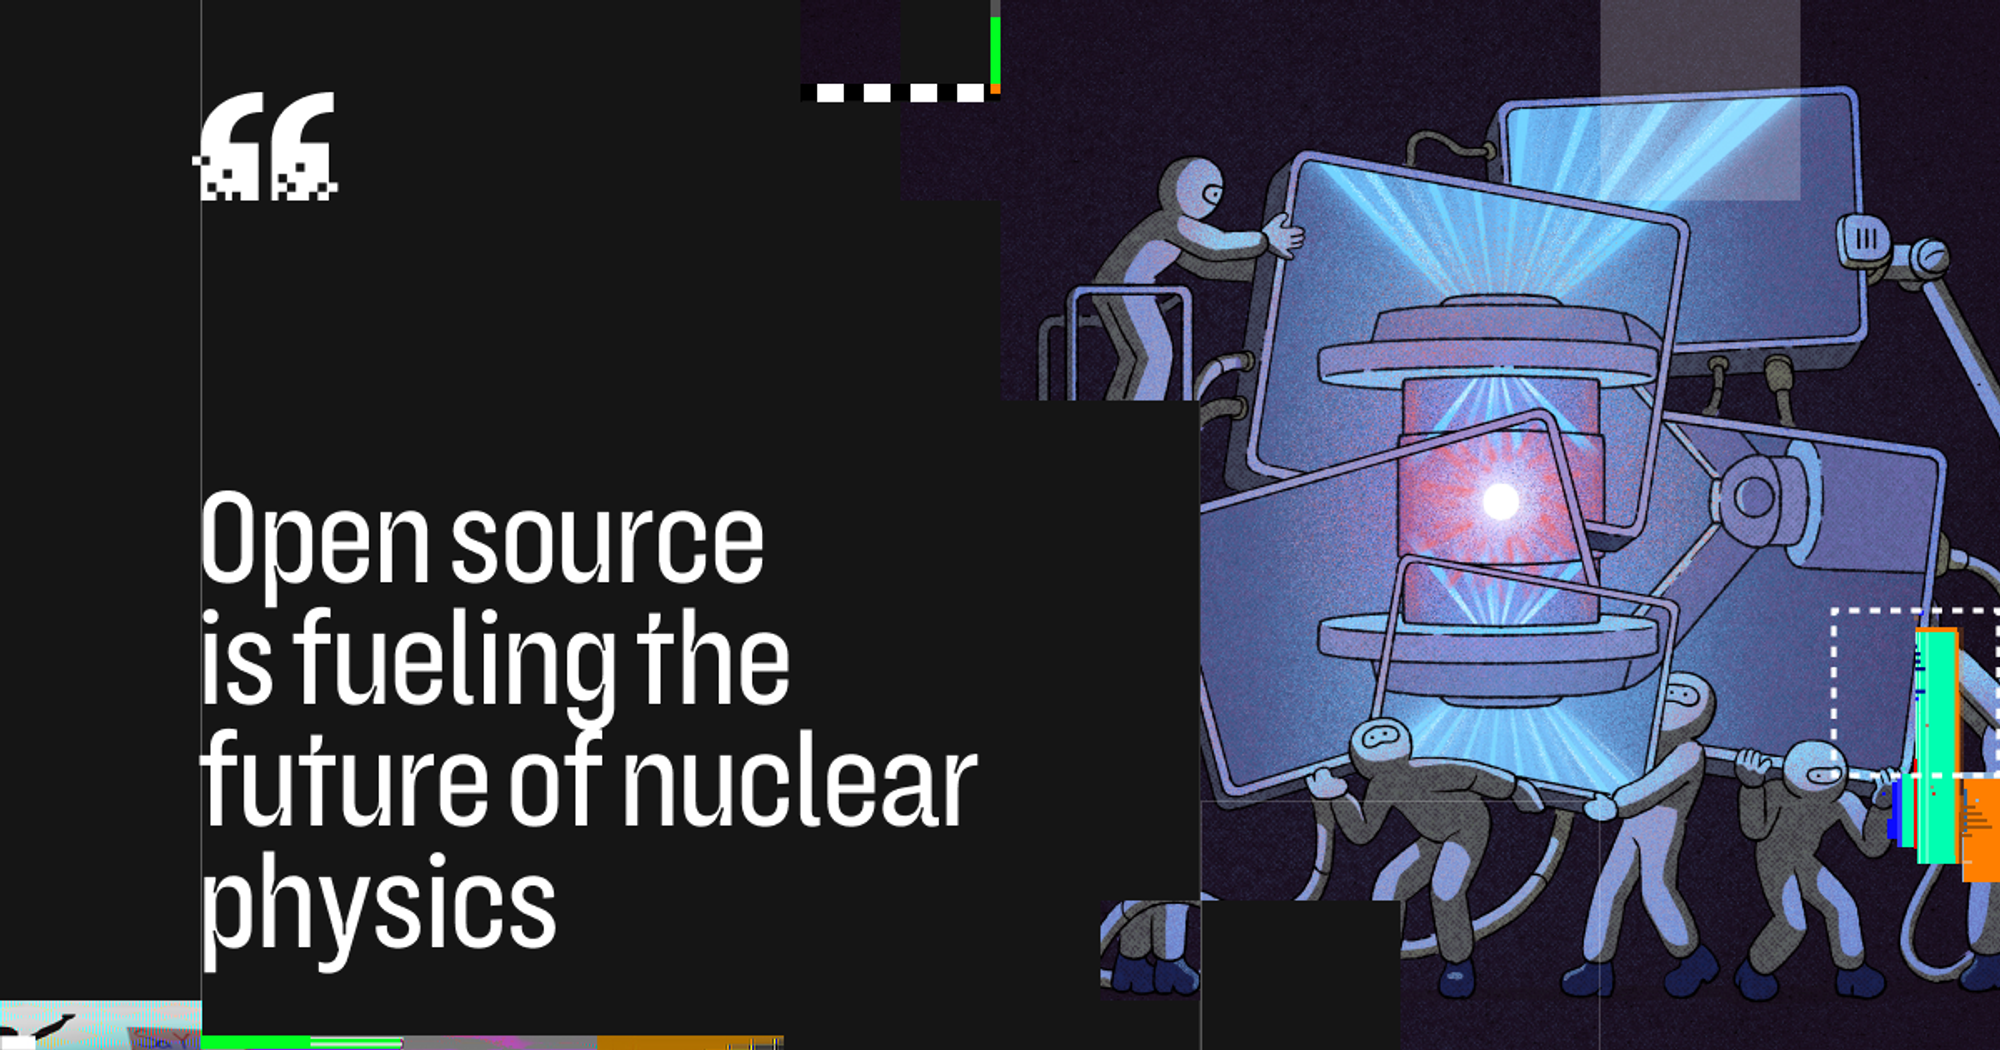 Open source is fueling the future of nuclear physics